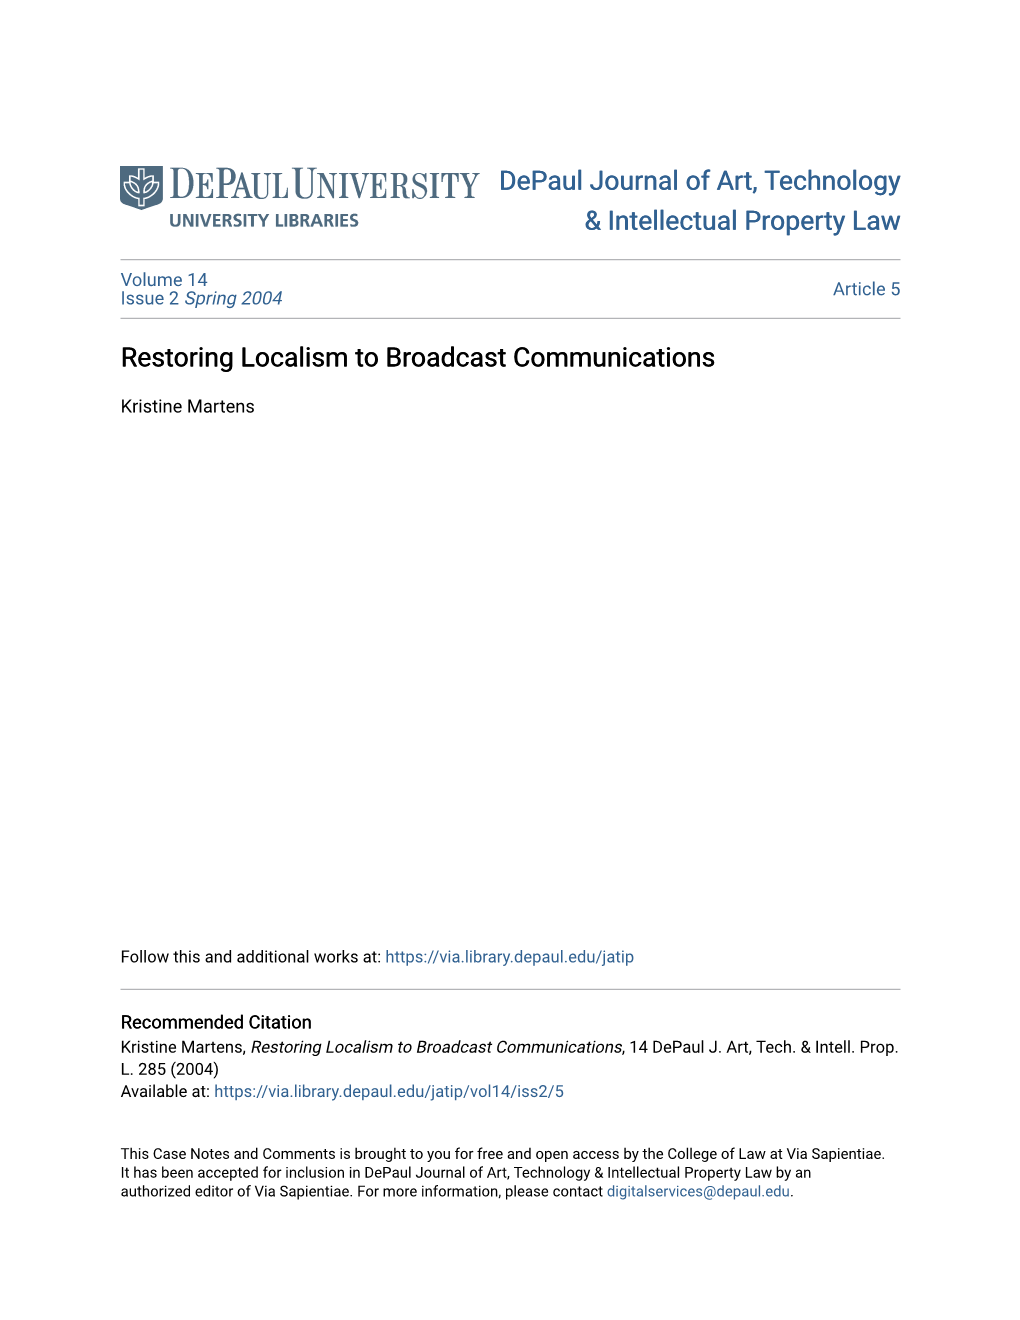 Restoring Localism to Broadcast Communications